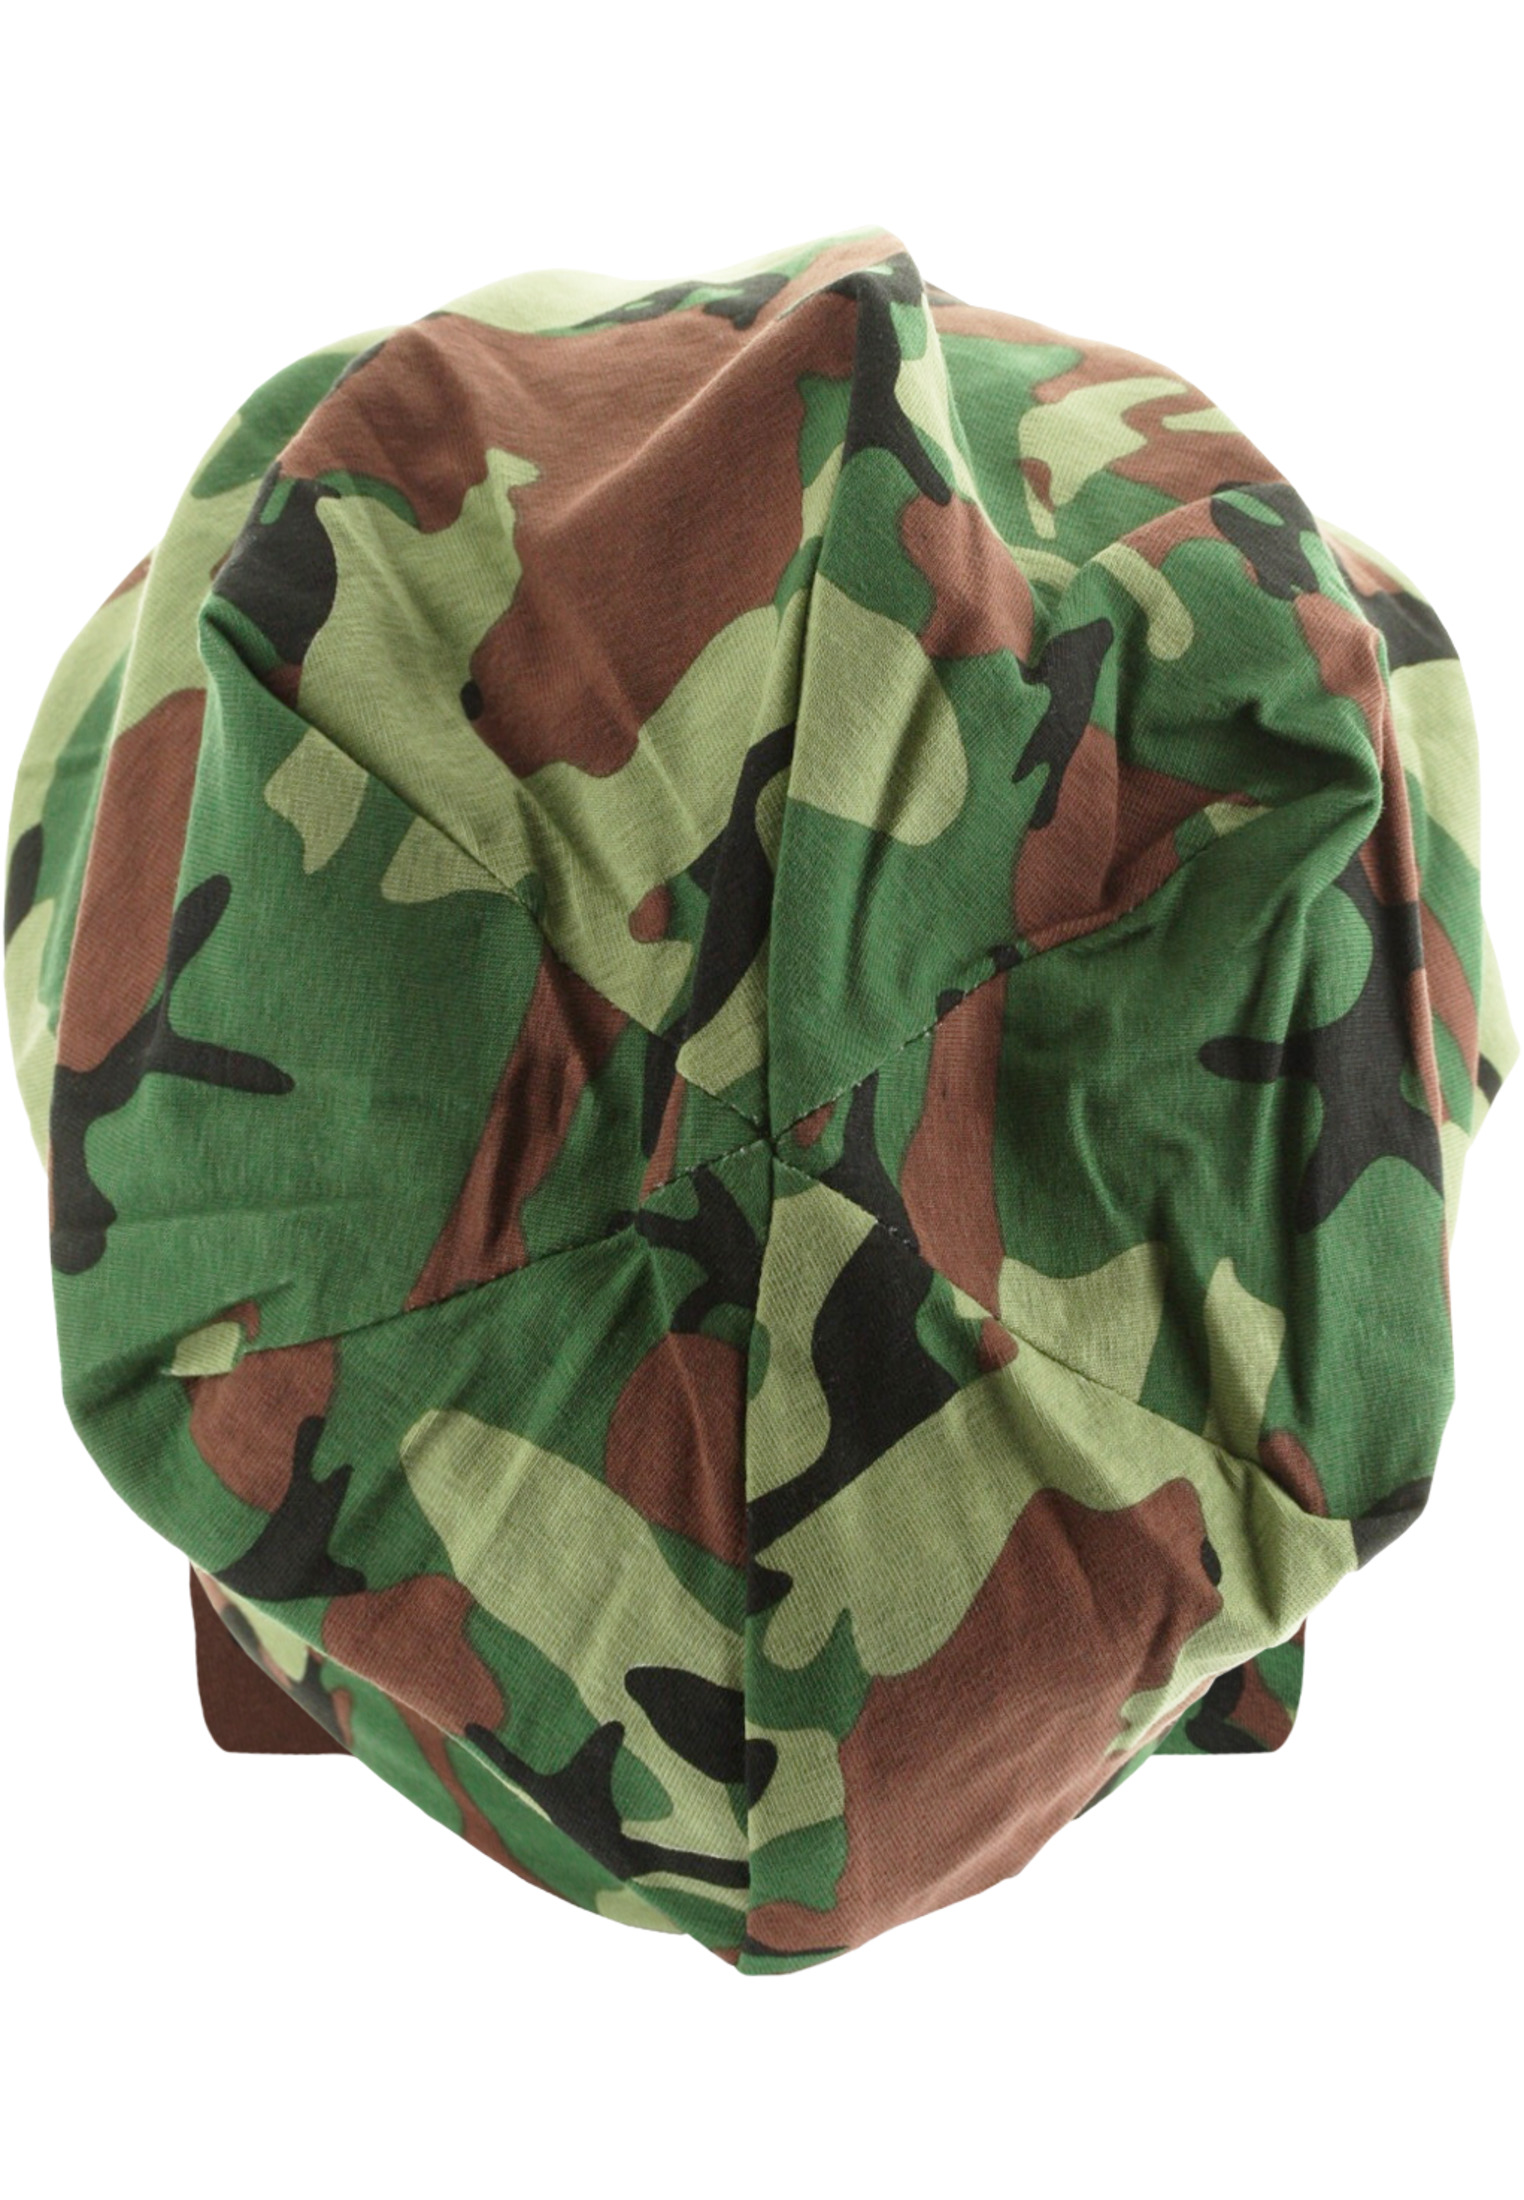 Caps & Beanies Printed Jersey Beanie in Farbe green camo/black